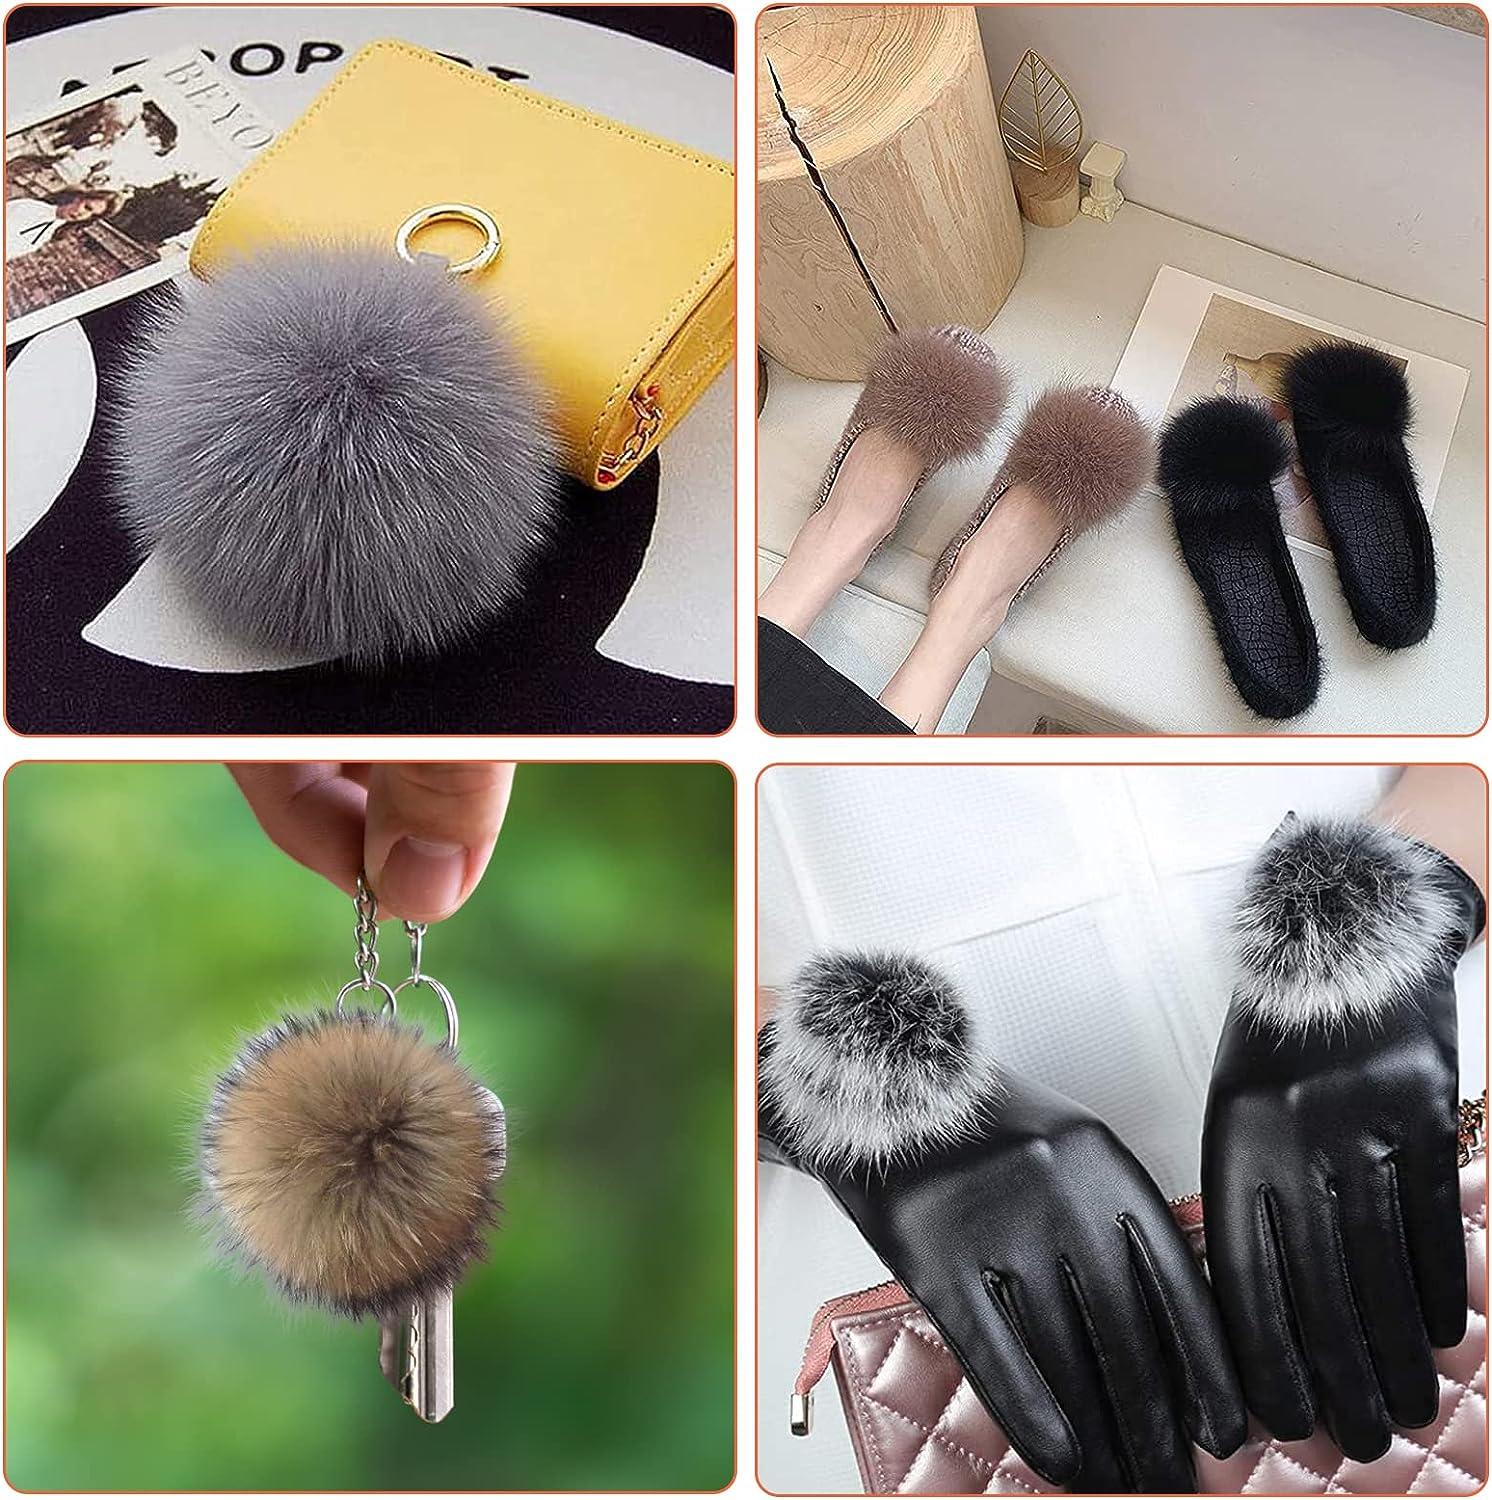 20 Pcs Faux Fur Pom Poms for Hats - 4 Inch Fluffy Pom Poms with Elastic  Loop for DIY Crafts, Removable Knitting Accessories for Shoes Scarves  Gloves